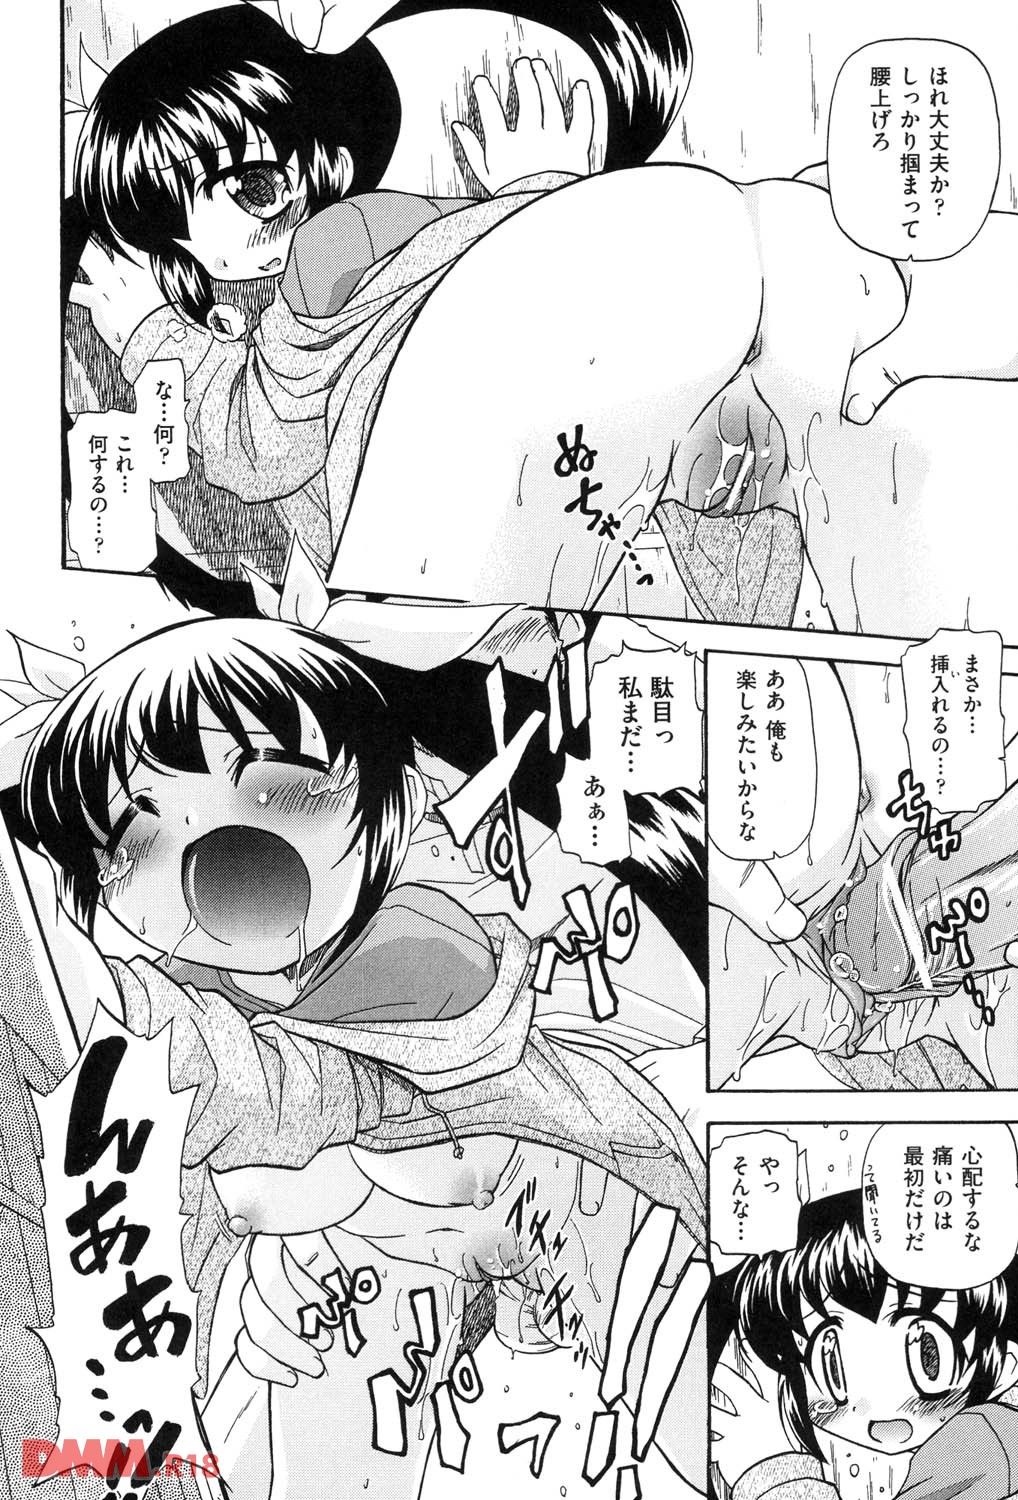 "Persistent lie." "this sex c." I got have sex? "It's words in a consensual and boyfriend say she's rare wwwwww 9